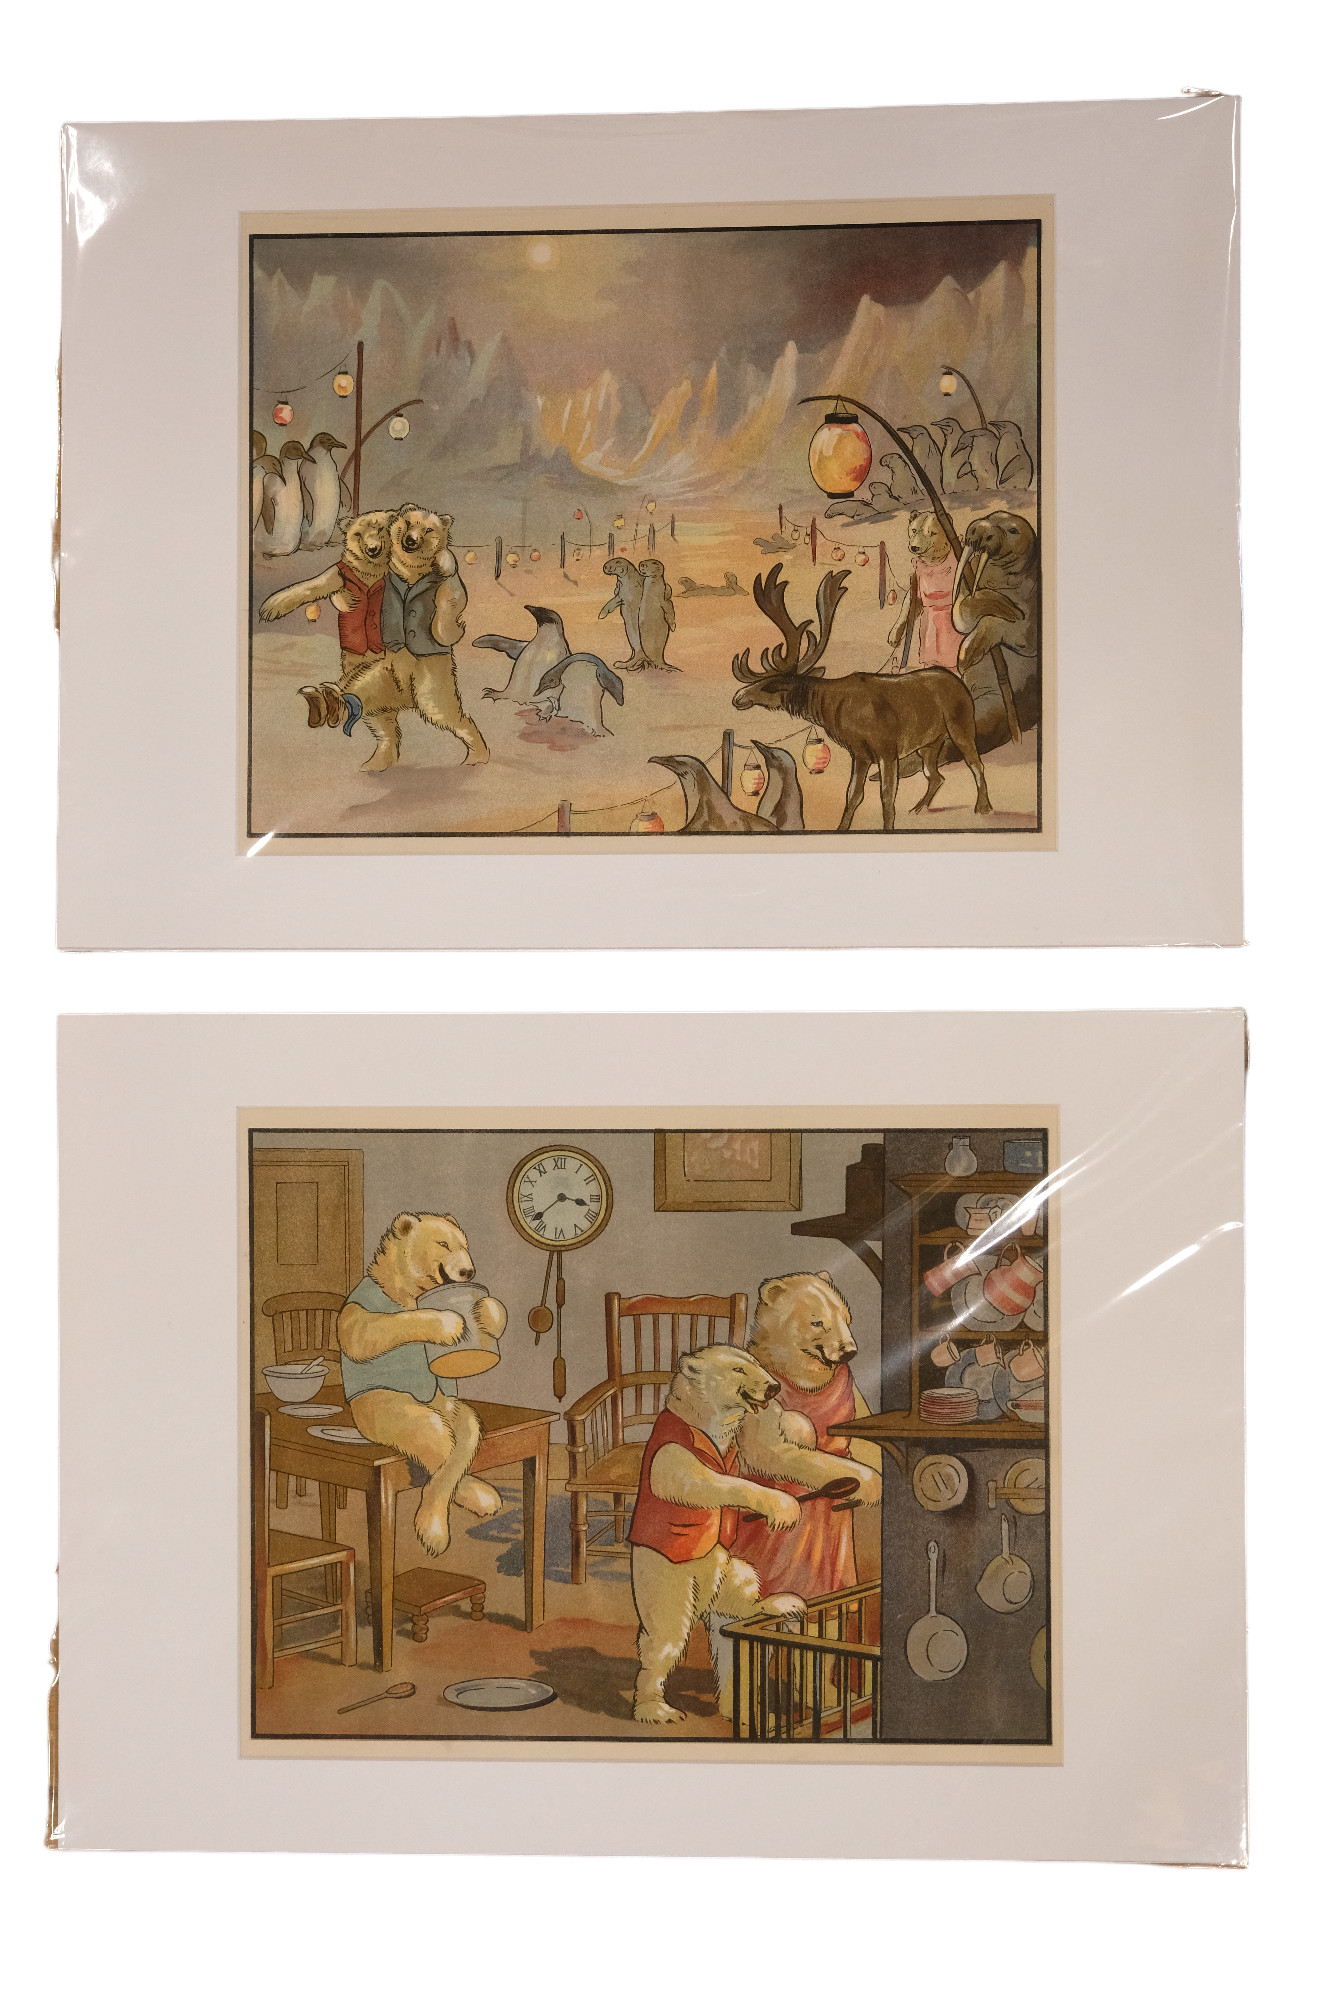 Bessie Nancy Parker (1872-1961) Nine studies from "Arctic Orphans", circa 1920, lithographic prints, - Image 3 of 5